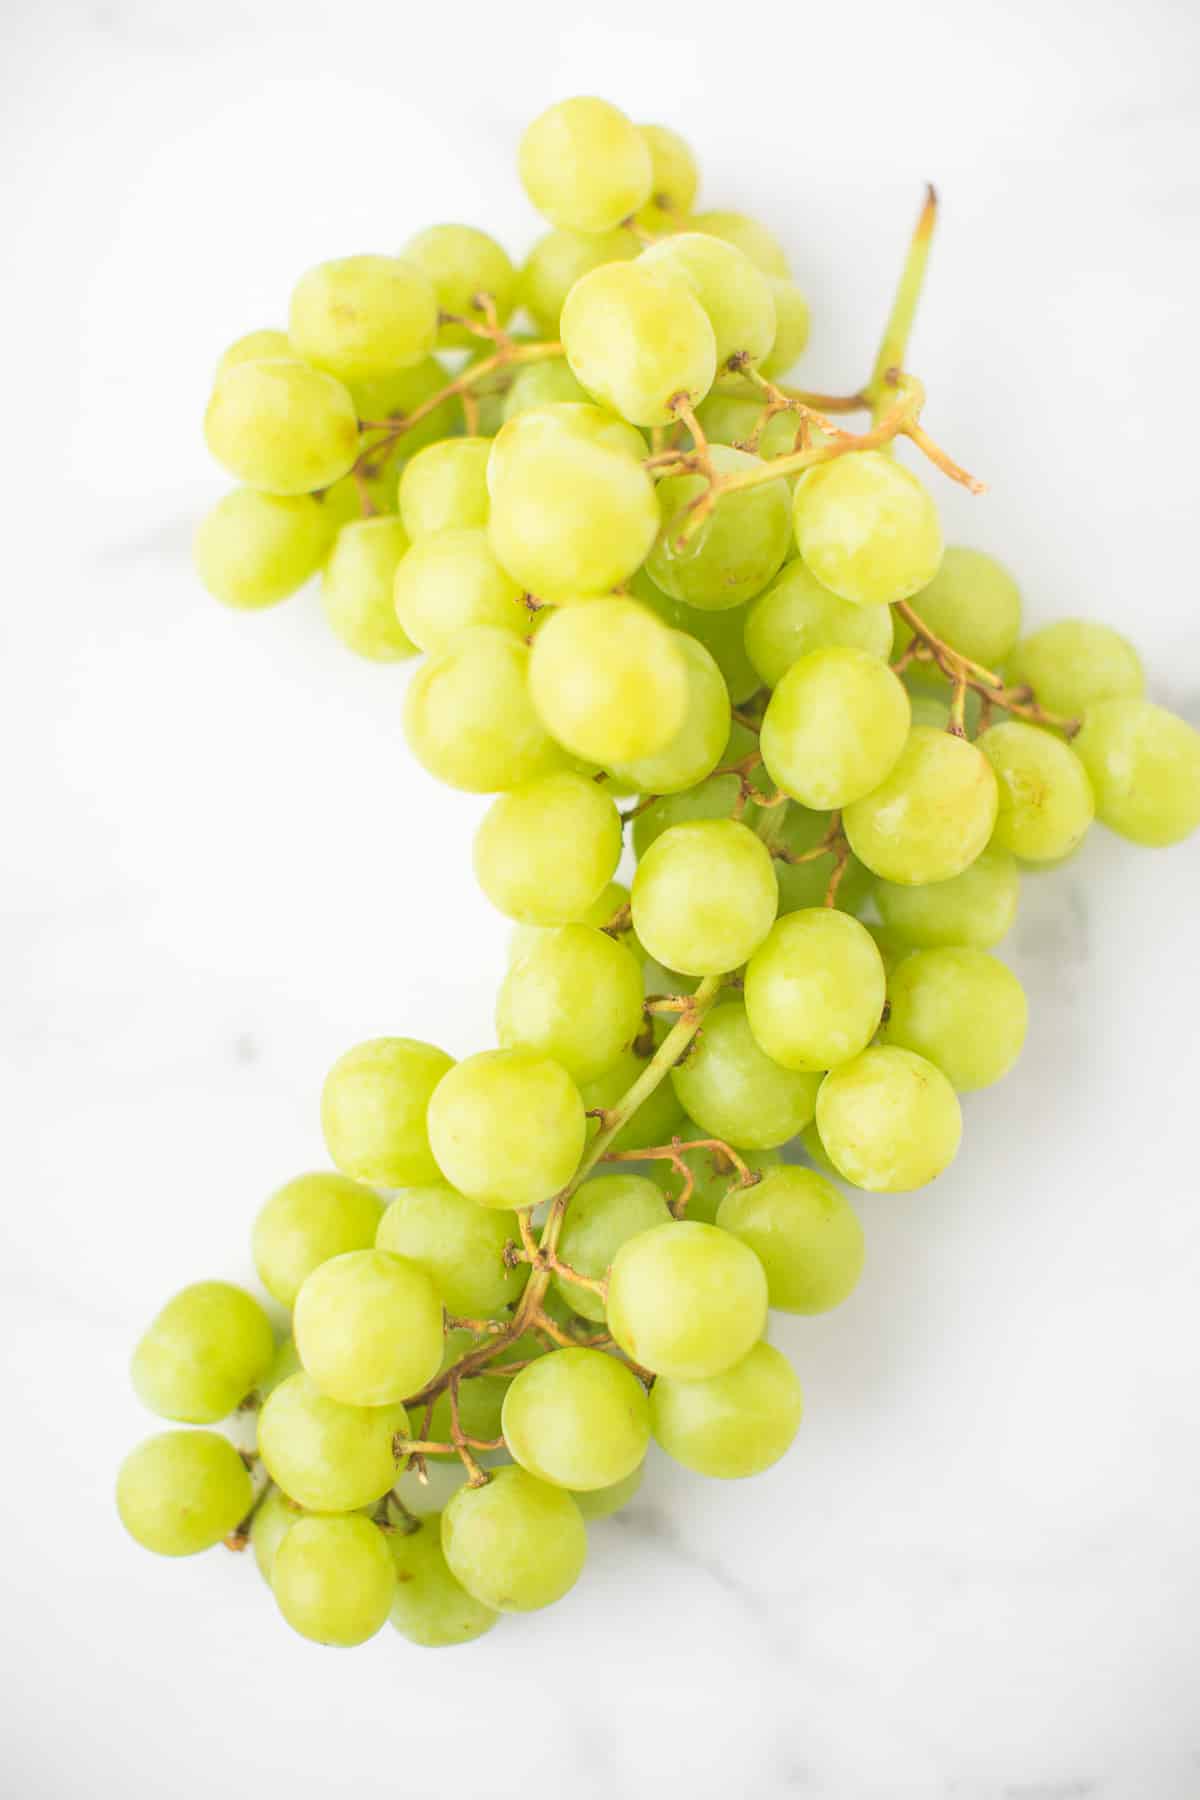 bunch of green grapes on a marble countertop.